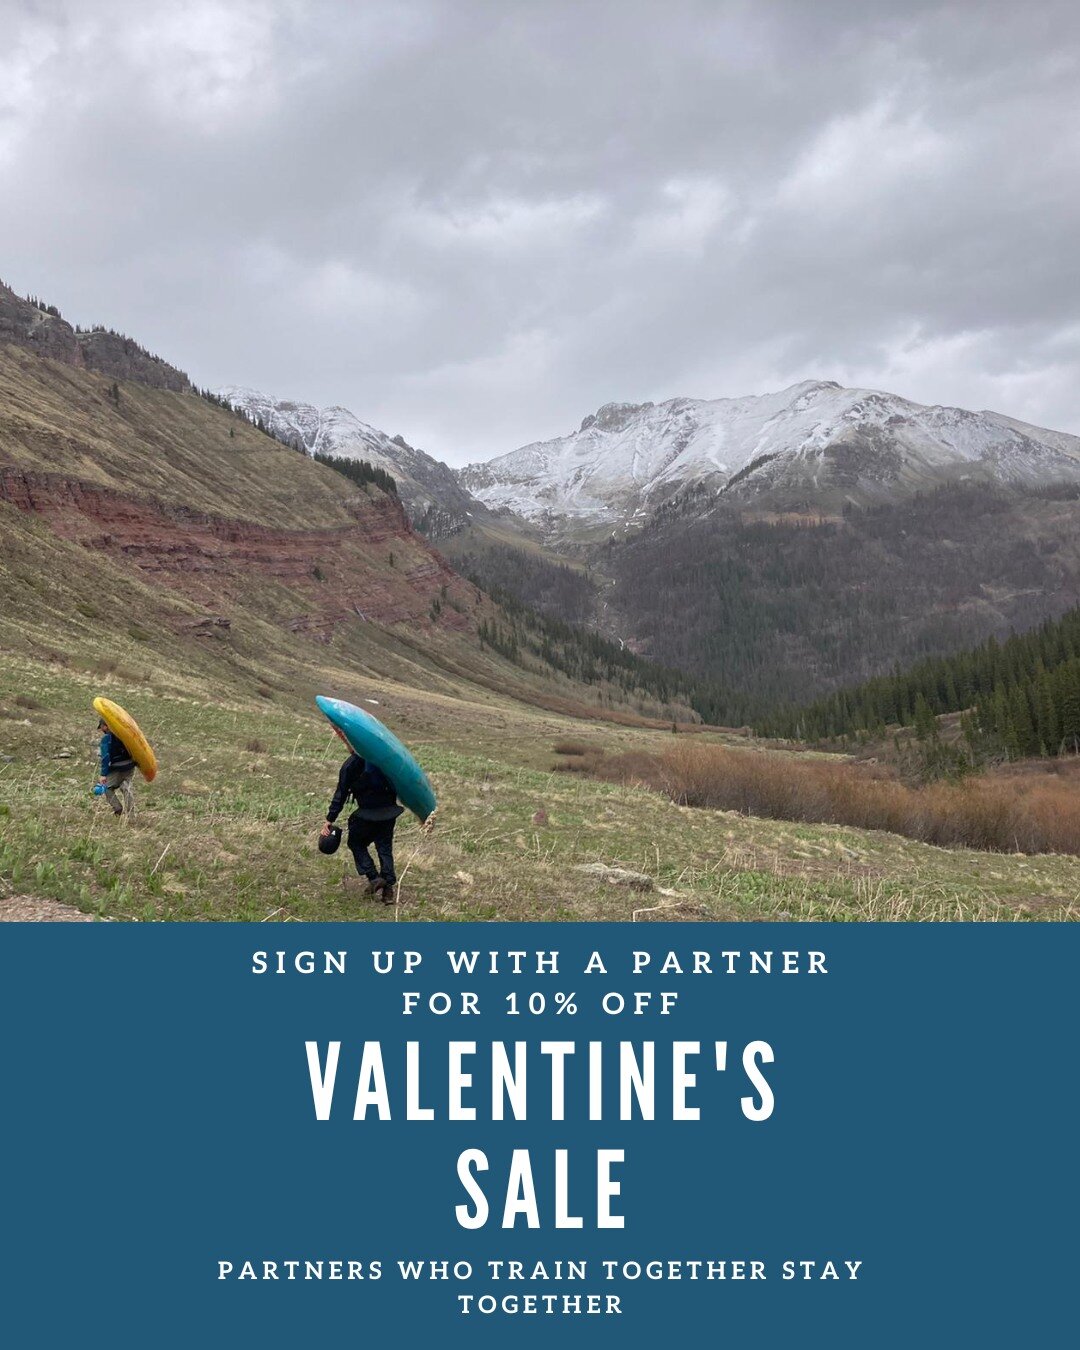 Backcountry partners that train together, stay together. Sign up for any wilderness medicine course this April with your partner and use the discount codes below and receive 10% off for both you and your backcountry partner. Build a foundation of tru